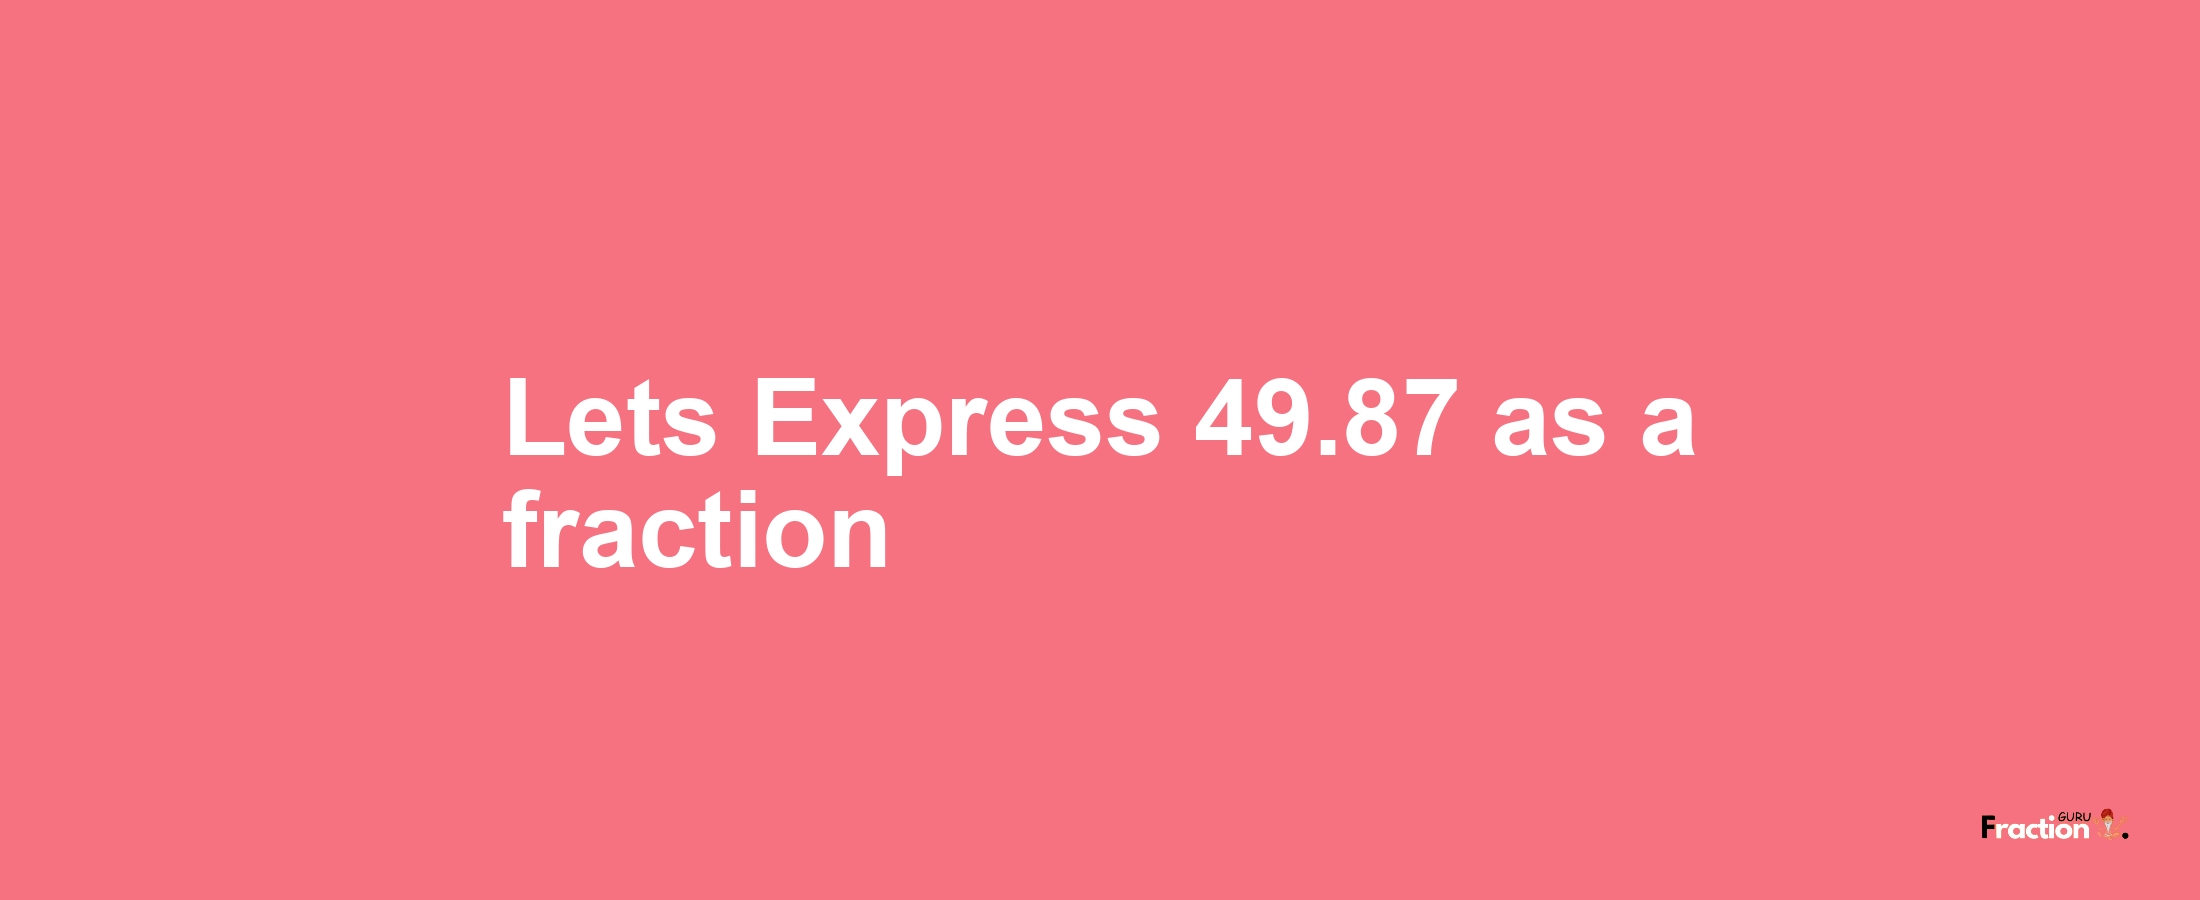 Lets Express 49.87 as afraction